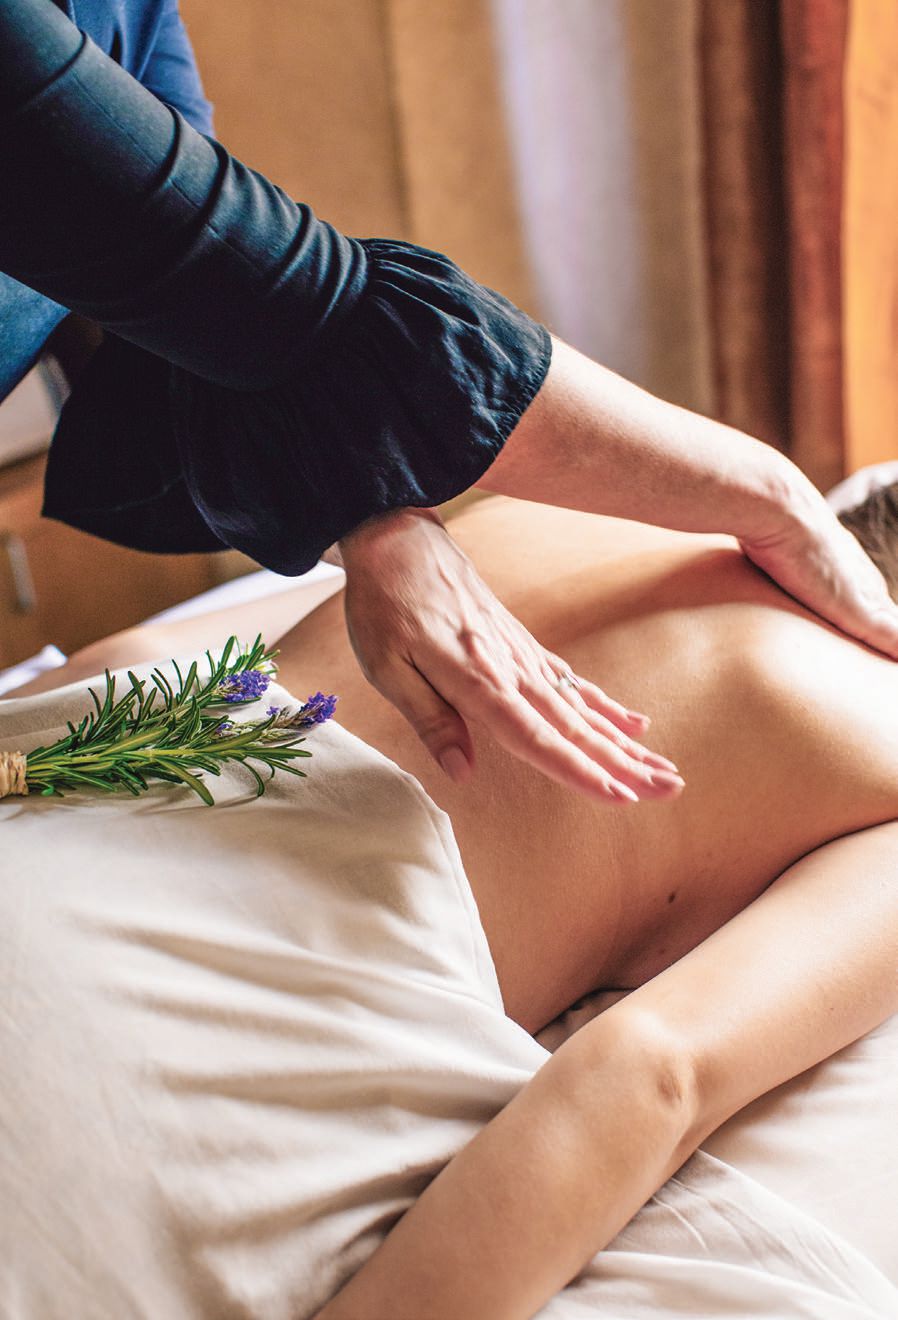 Indulge in a soothing massage at Revive Spa. PHOTO COURTESY OF: JW MARRIOTT PHOENIX DESERT RIDGE RESORT & SPA